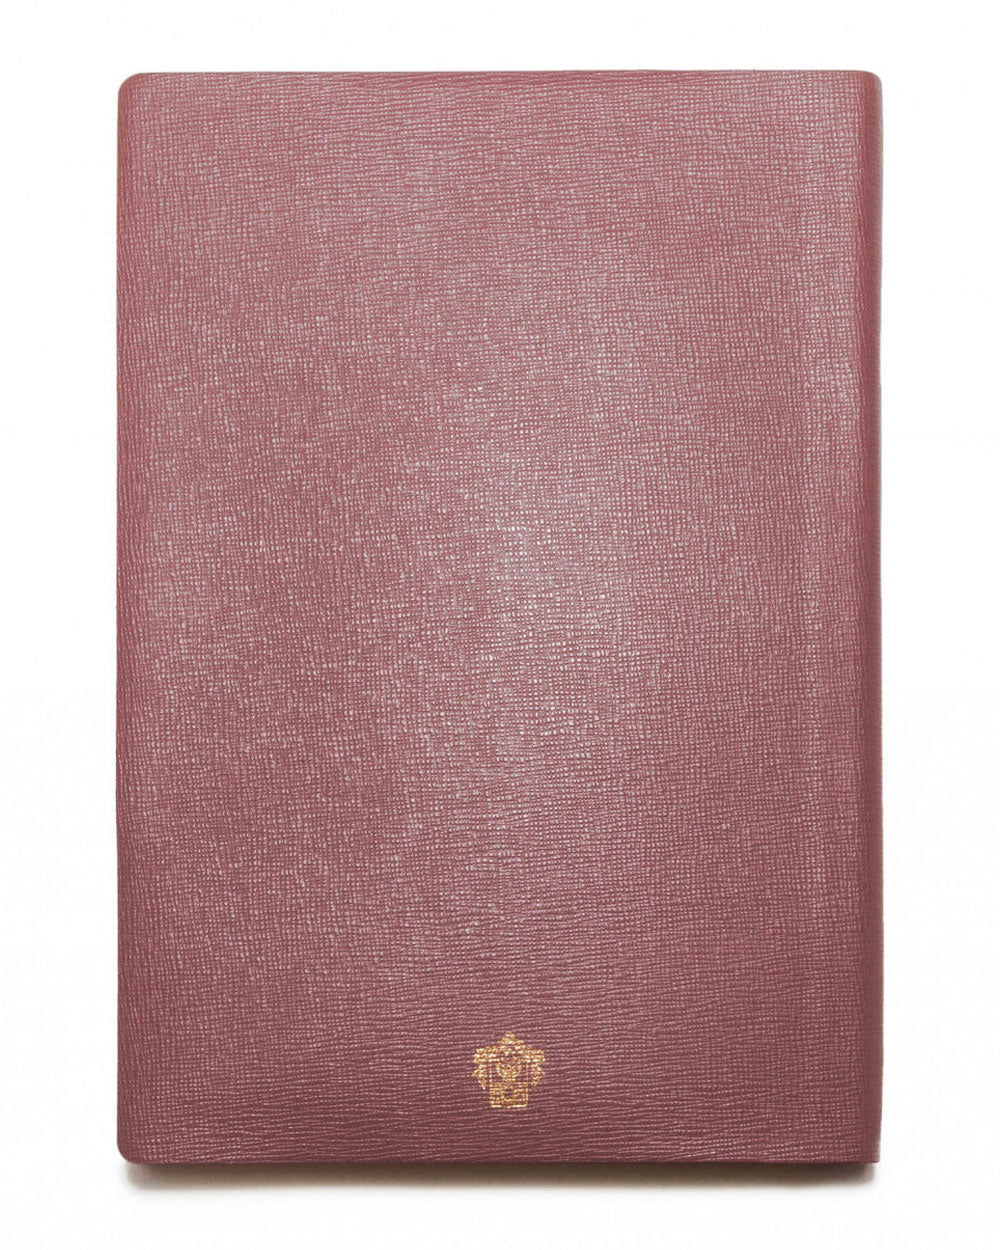 Medium Milano Leather Notebook in Lilac